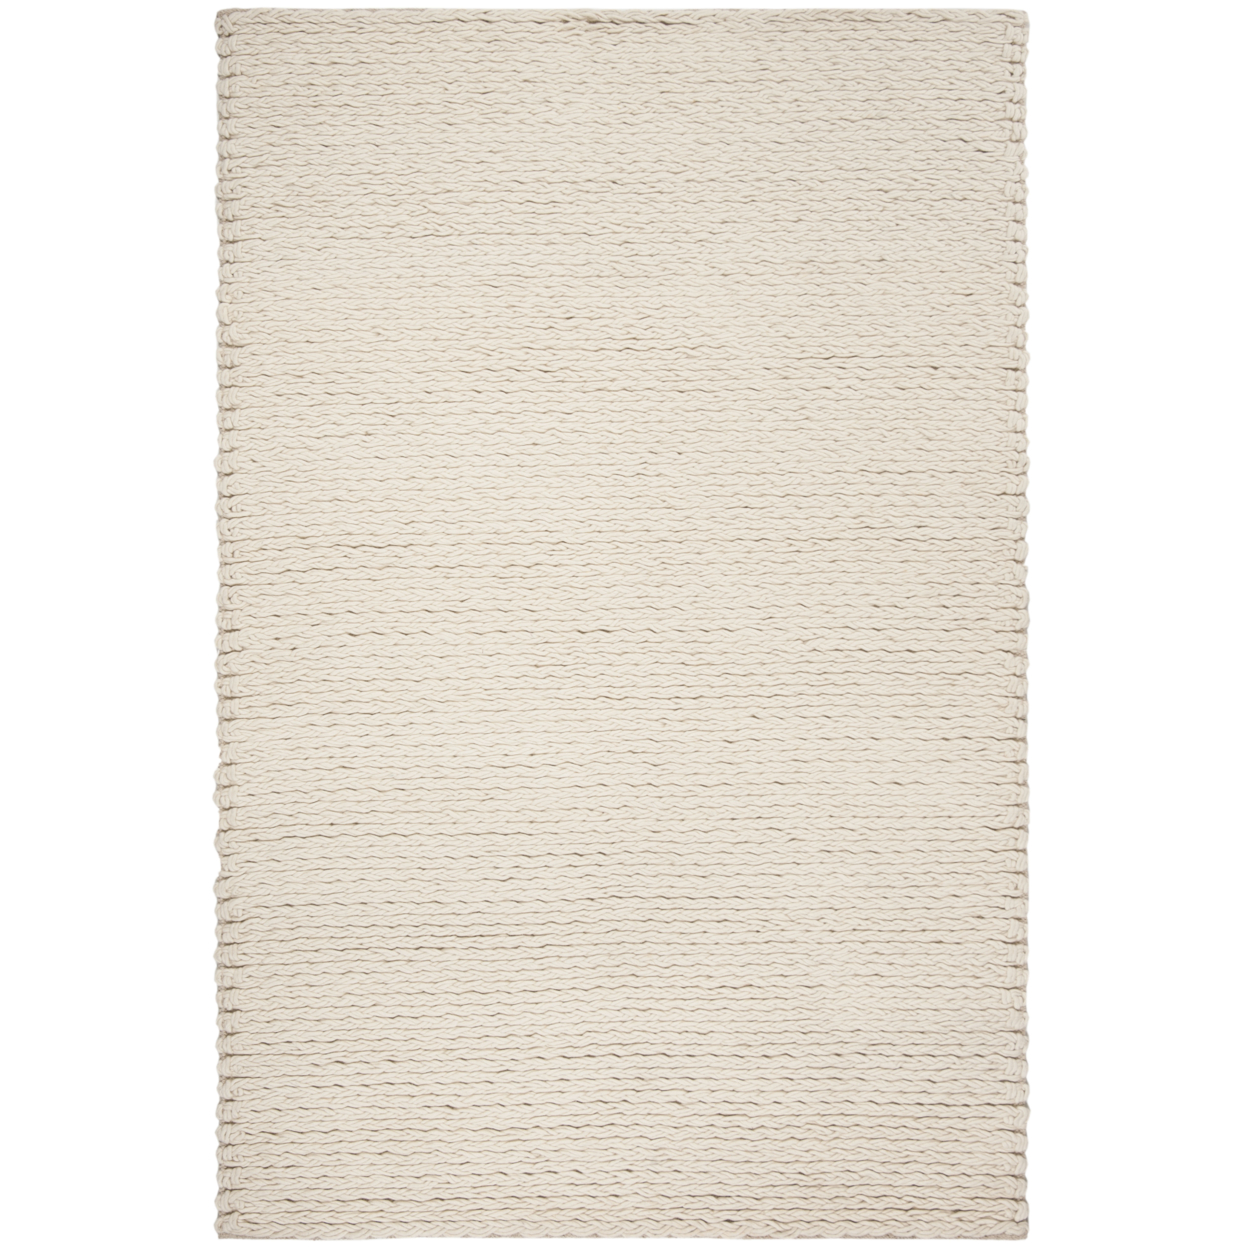 SAFAVIEH Natura Collection NAT802A Handwoven Ivory Rug - 5' X 8'